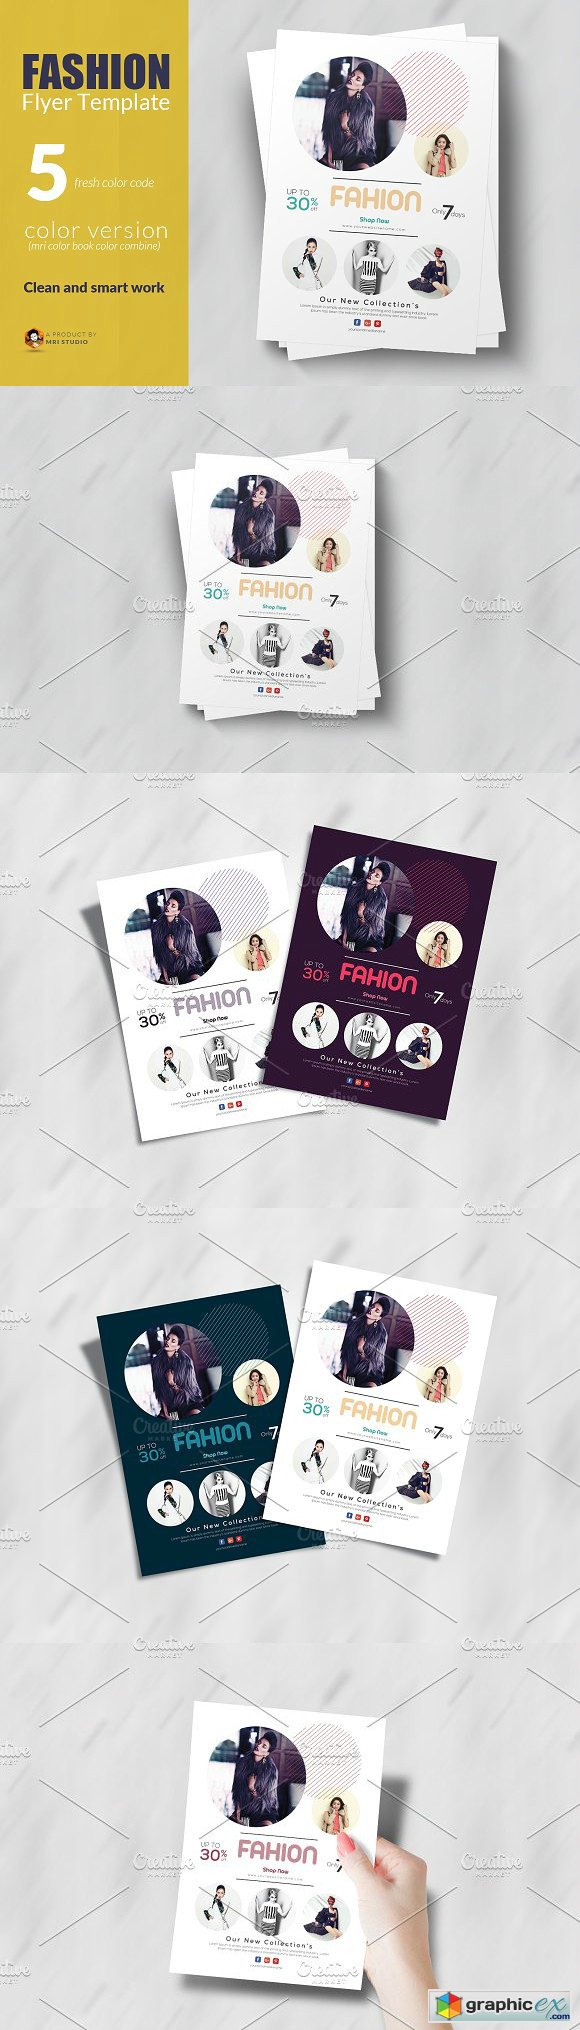 Fashion Flyer Template 1862469